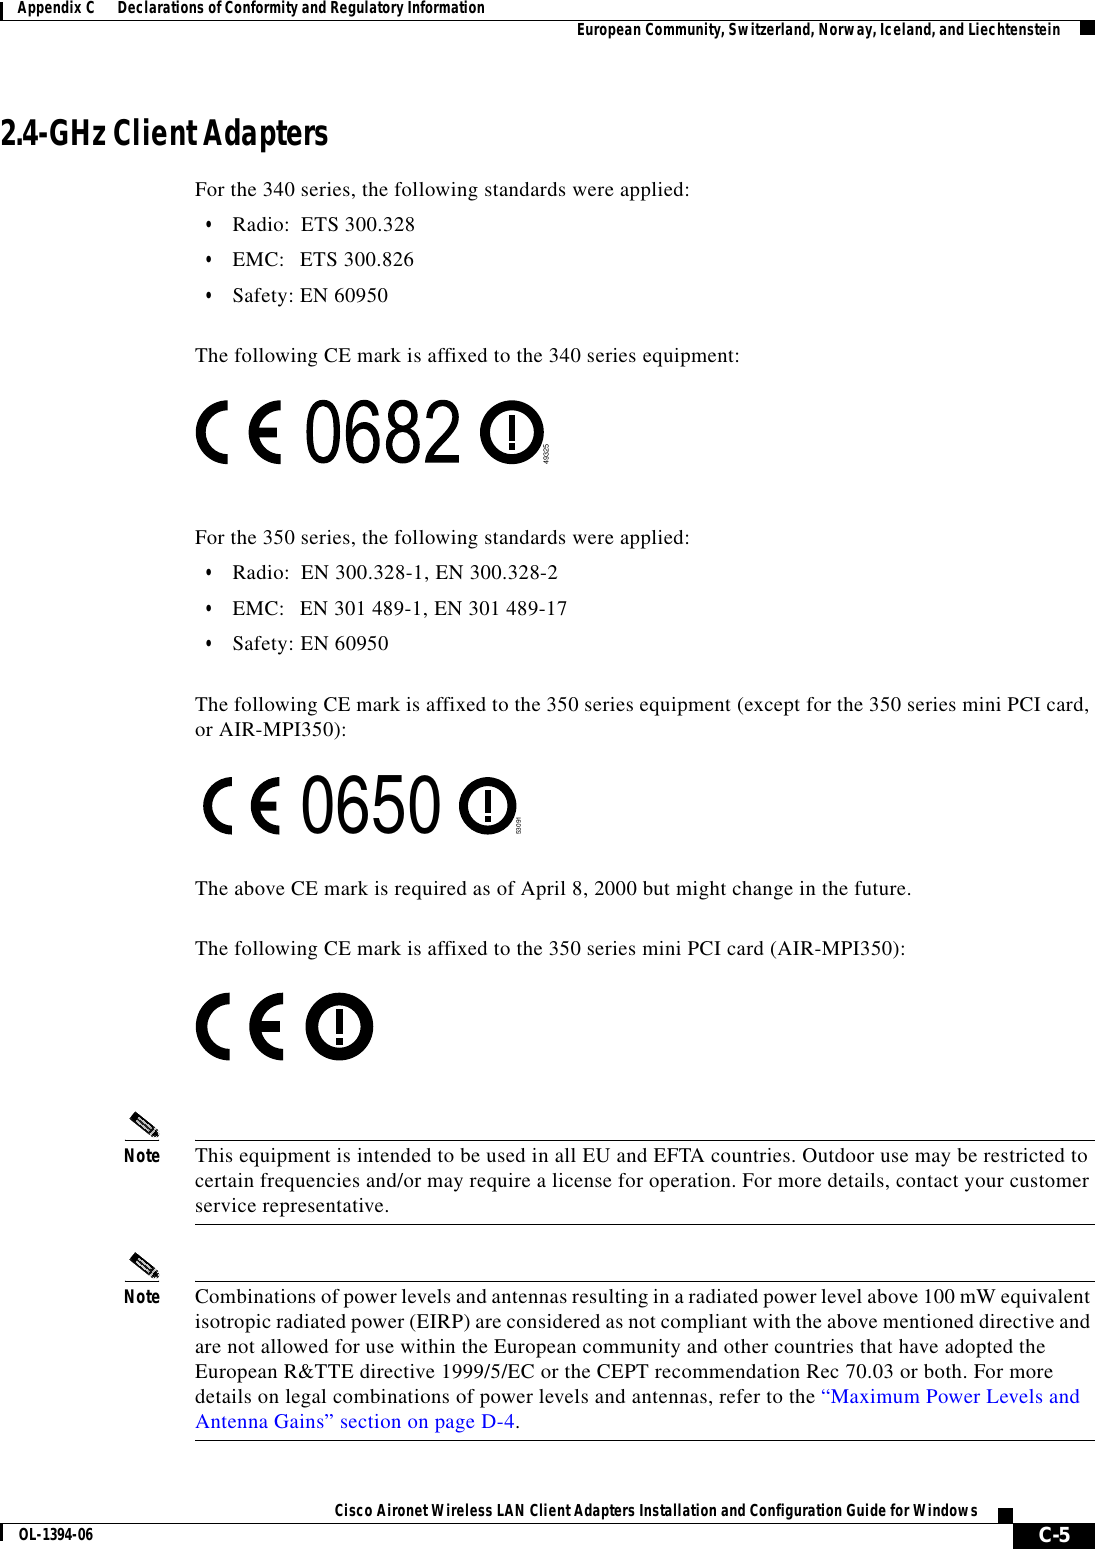 C-5Cisco Aironet Wireless LAN Client Adapters Installation and Configuration Guide for WindowsOL-1394-06Appendix C      Declarations of Conformity and Regulatory Information European Community, Switzerland, Norway, Iceland, and Liechtenstein2.4-GHz Client AdaptersFor the 340 series, the following standards were applied:•Radio: ETS 300.328•EMC: ETS 300.826•Safety: EN 60950The following CE mark is affixed to the 340 series equipment:For the 350 series, the following standards were applied:•Radio: EN 300.328-1, EN 300.328-2•EMC: EN 301 489-1, EN 301 489-17•Safety: EN 60950The following CE mark is affixed to the 350 series equipment (except for the 350 series mini PCI card, or AIR-MPI350):The above CE mark is required as of April 8, 2000 but might change in the future.The following CE mark is affixed to the 350 series mini PCI card (AIR-MPI350):Note This equipment is intended to be used in all EU and EFTA countries. Outdoor use may be restricted to certain frequencies and/or may require a license for operation. For more details, contact your customer service representative.Note Combinations of power levels and antennas resulting in a radiated power level above 100 mW equivalent isotropic radiated power (EIRP) are considered as not compliant with the above mentioned directive and are not allowed for use within the European community and other countries that have adopted the European R&amp;TTE directive 1999/5/EC or the CEPT recommendation Rec 70.03 or both. For more details on legal combinations of power levels and antennas, refer to the “Maximum Power Levels and Antenna Gains” section on page D-4.49325530910650